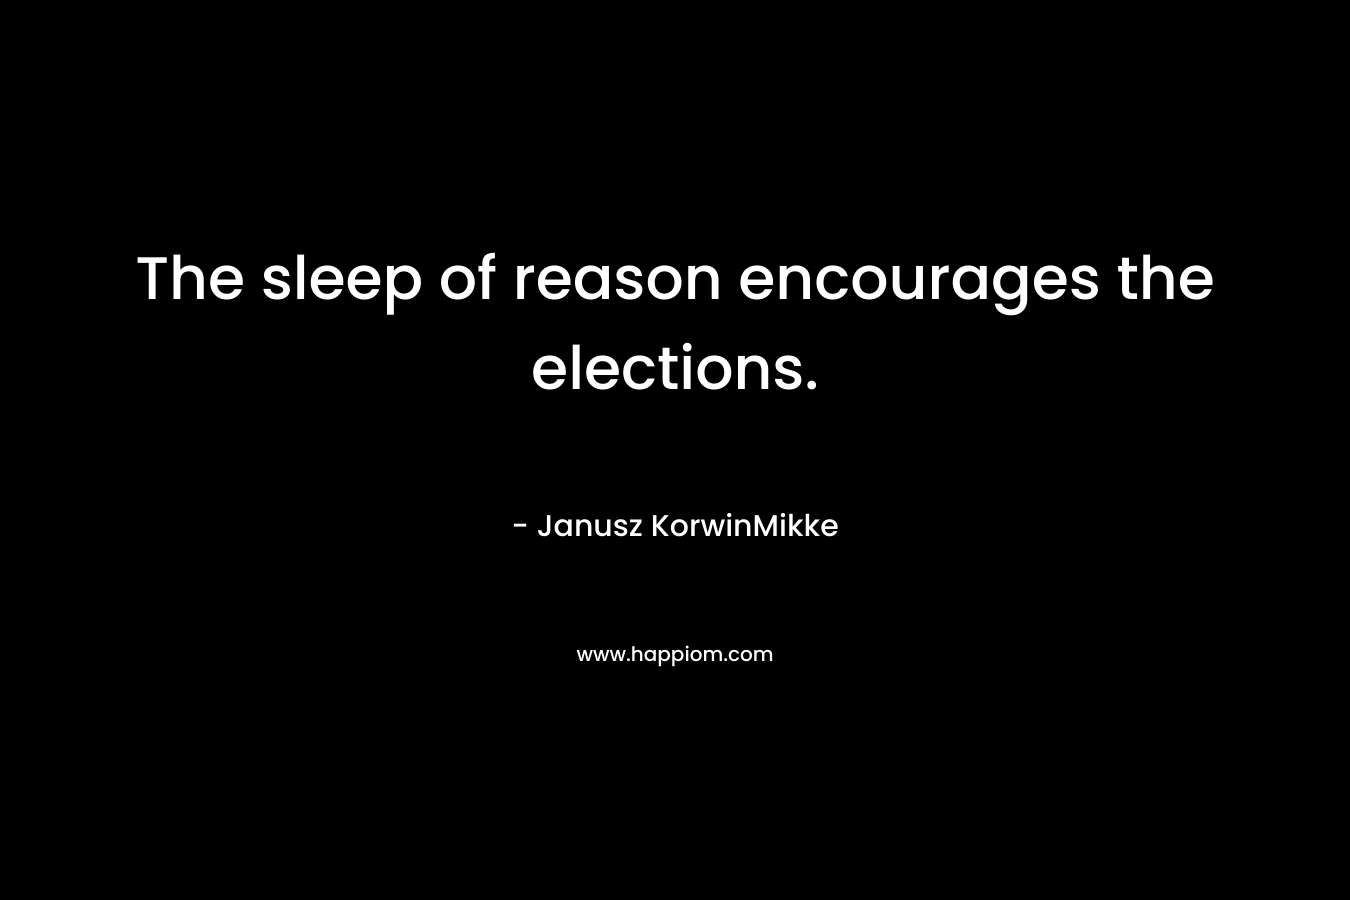 The sleep of reason encourages the elections.